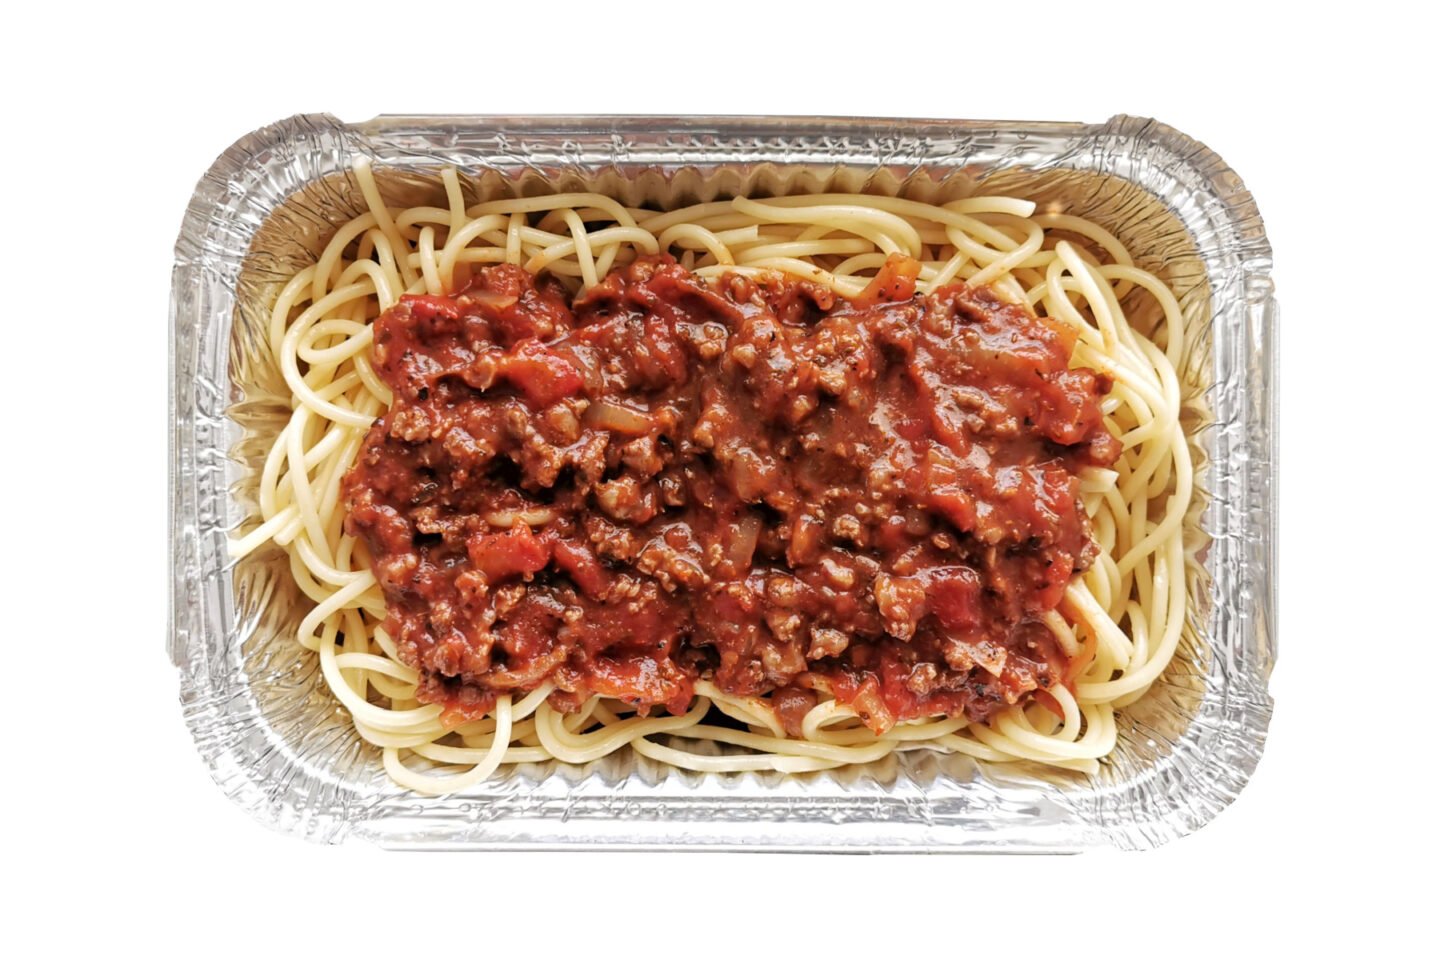 spaghetti with bolognese sauce in aluminum container